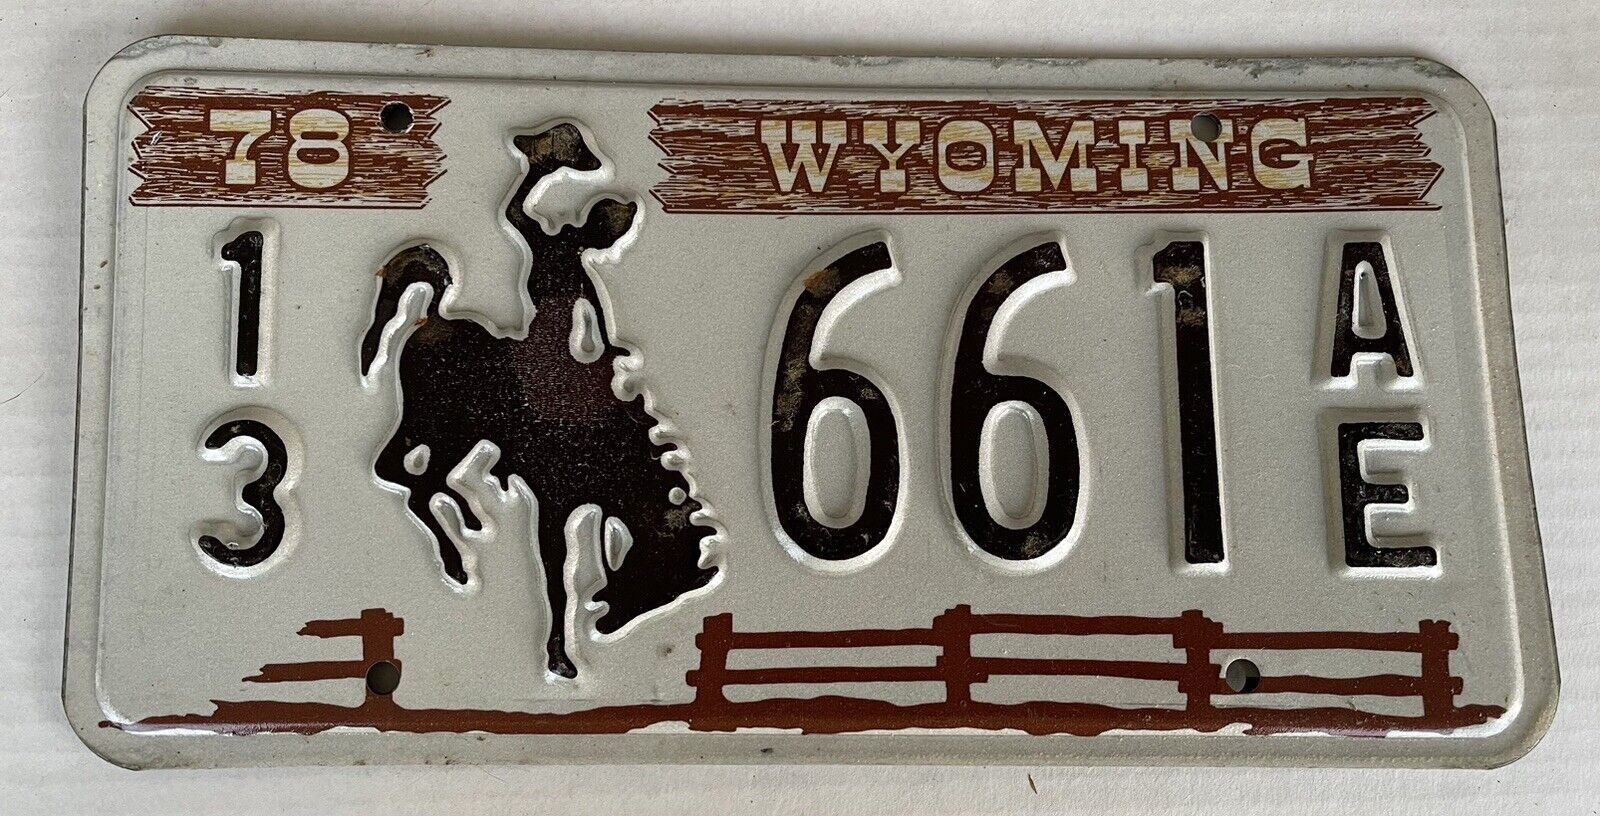 WYOMING 1978 License Plate 13 661 AE  Bucking Bronco  Vintage New Old Stock